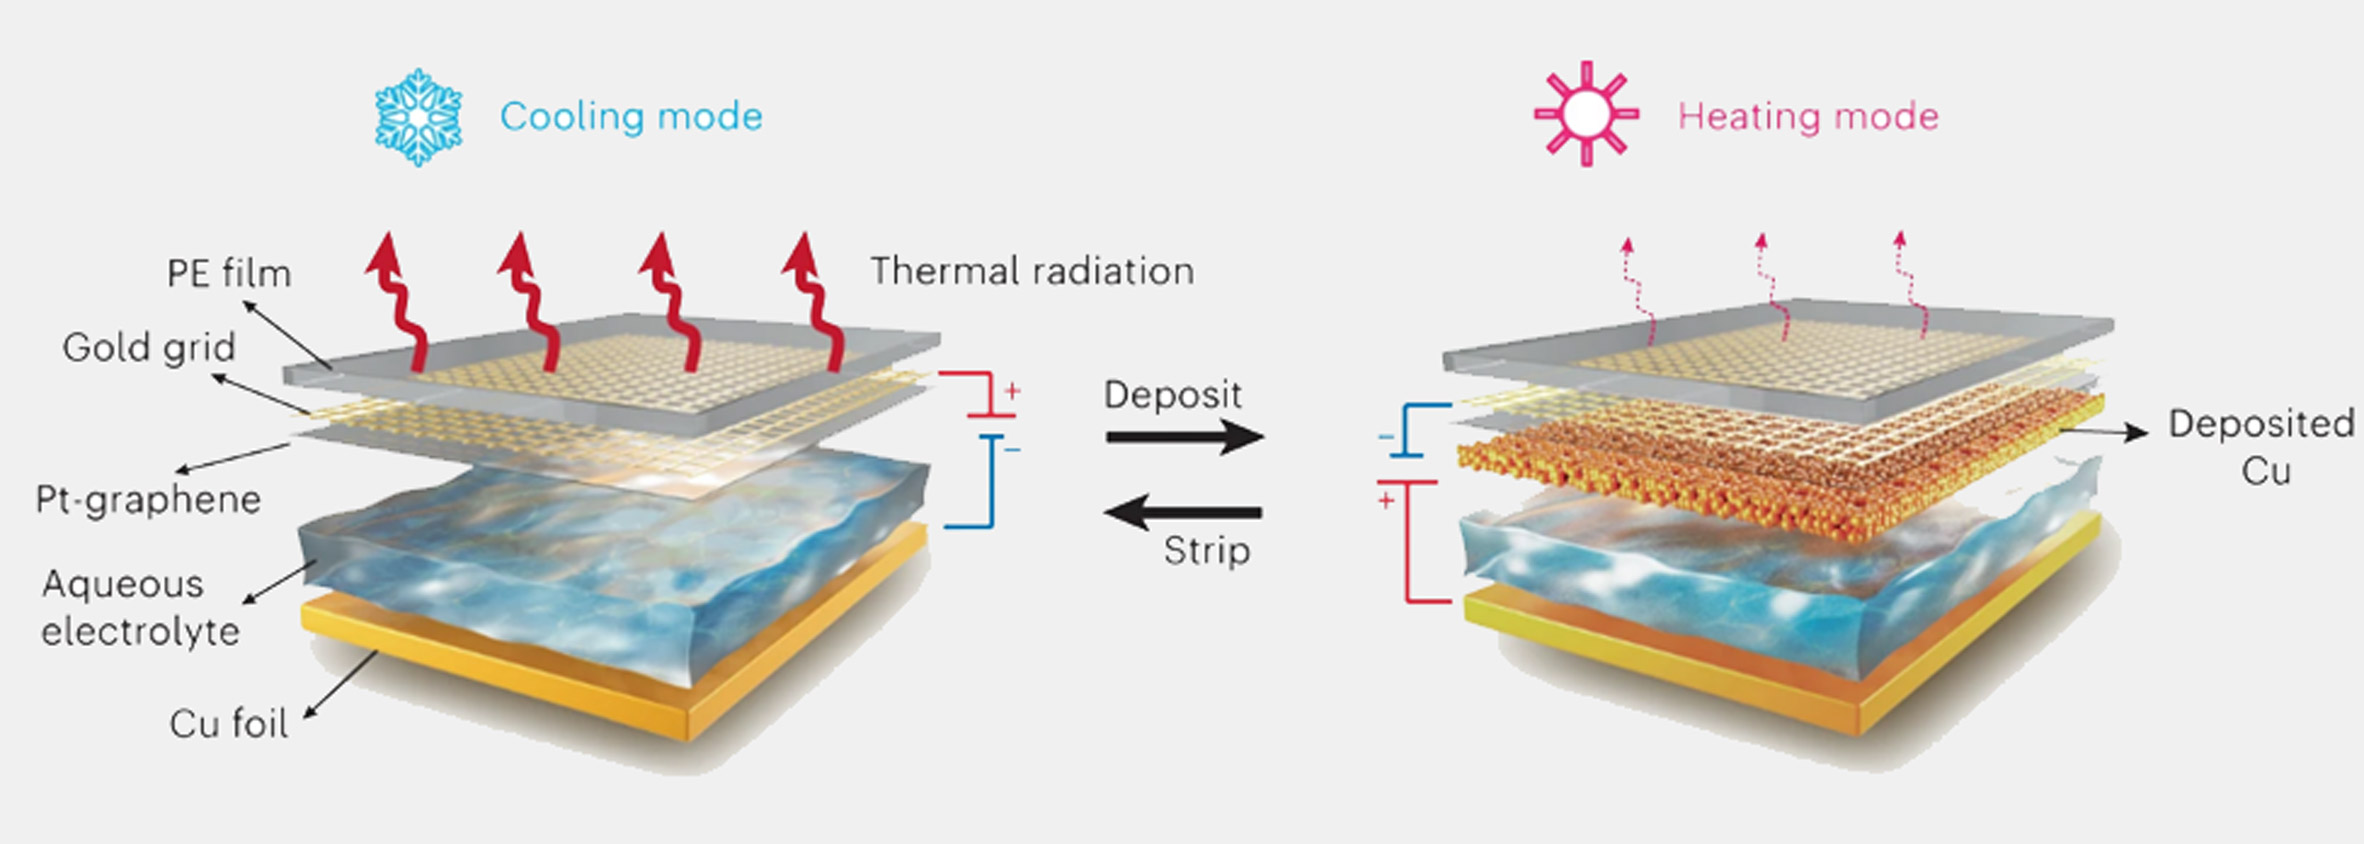 Diagram of the colour-changing material showing, from top, a layer of PE film, a gold grid, graphene, a layer where copper is deposited or stripped away, an aqueous electrolyte layer and copper foil